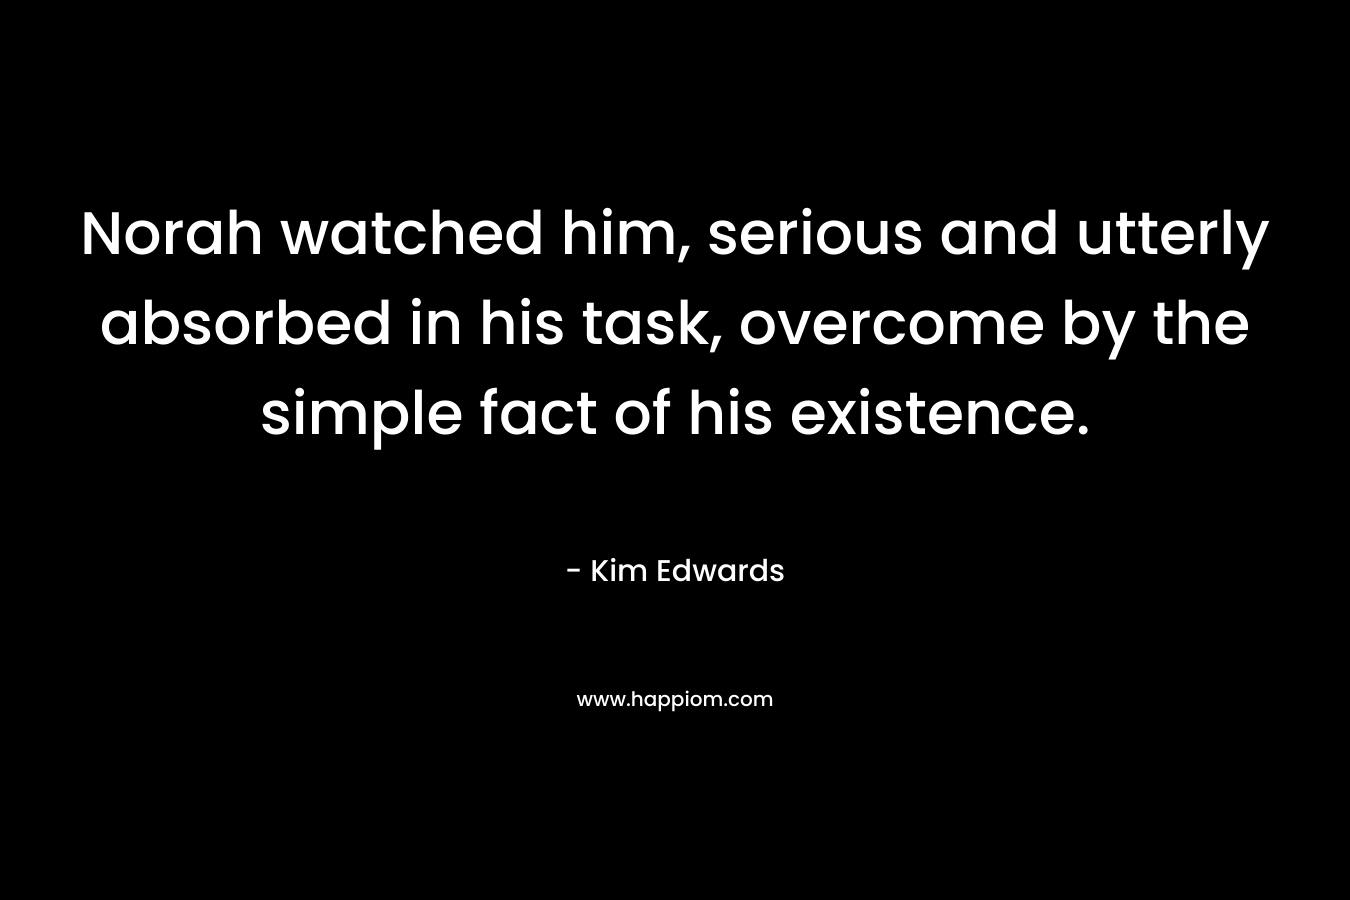 Norah watched him, serious and utterly absorbed in his task, overcome by the simple fact of his existence. – Kim Edwards